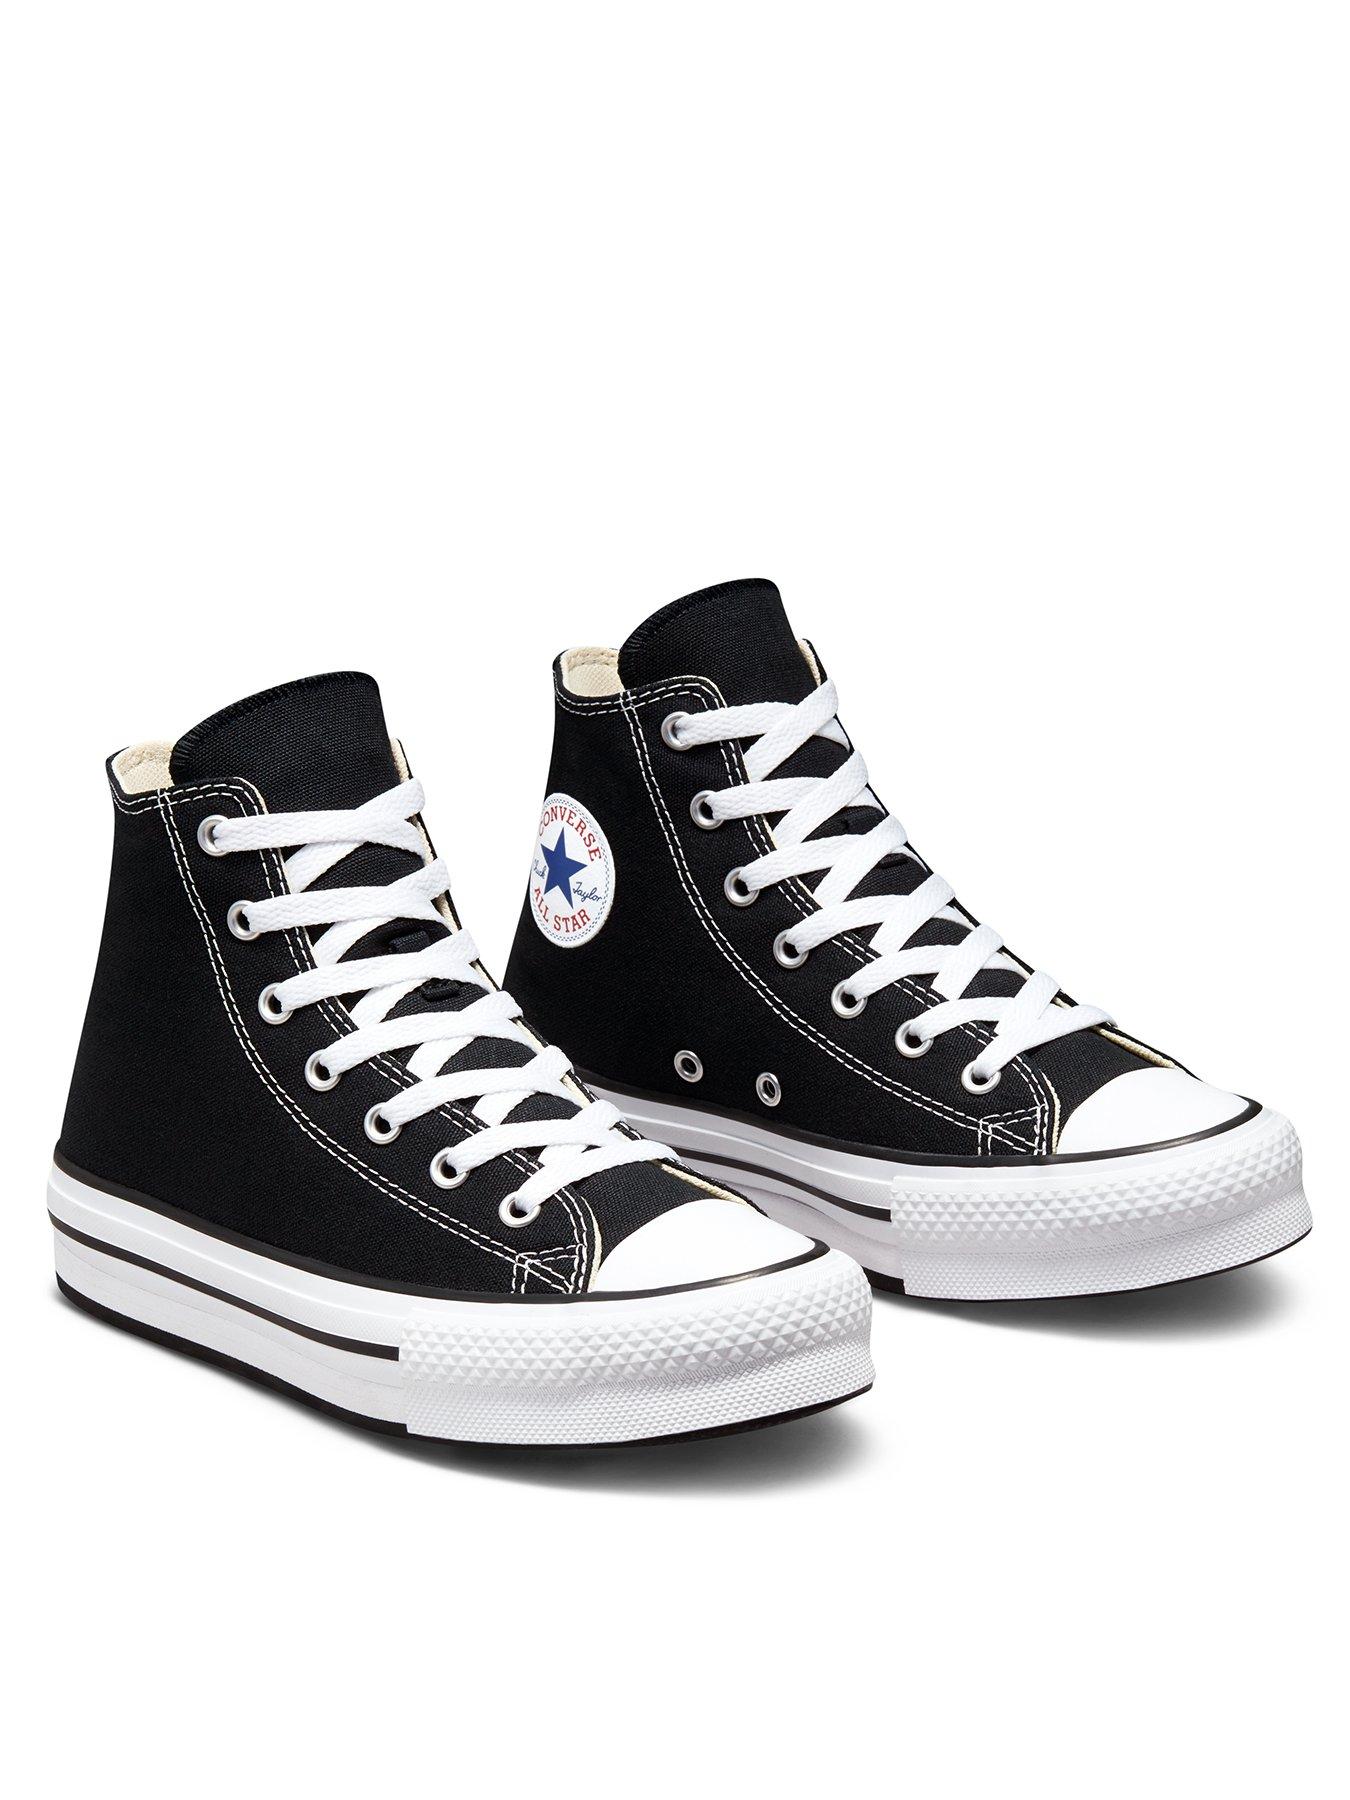 Top 50+ images black converse for girls - In.thptnganamst.edu.vn